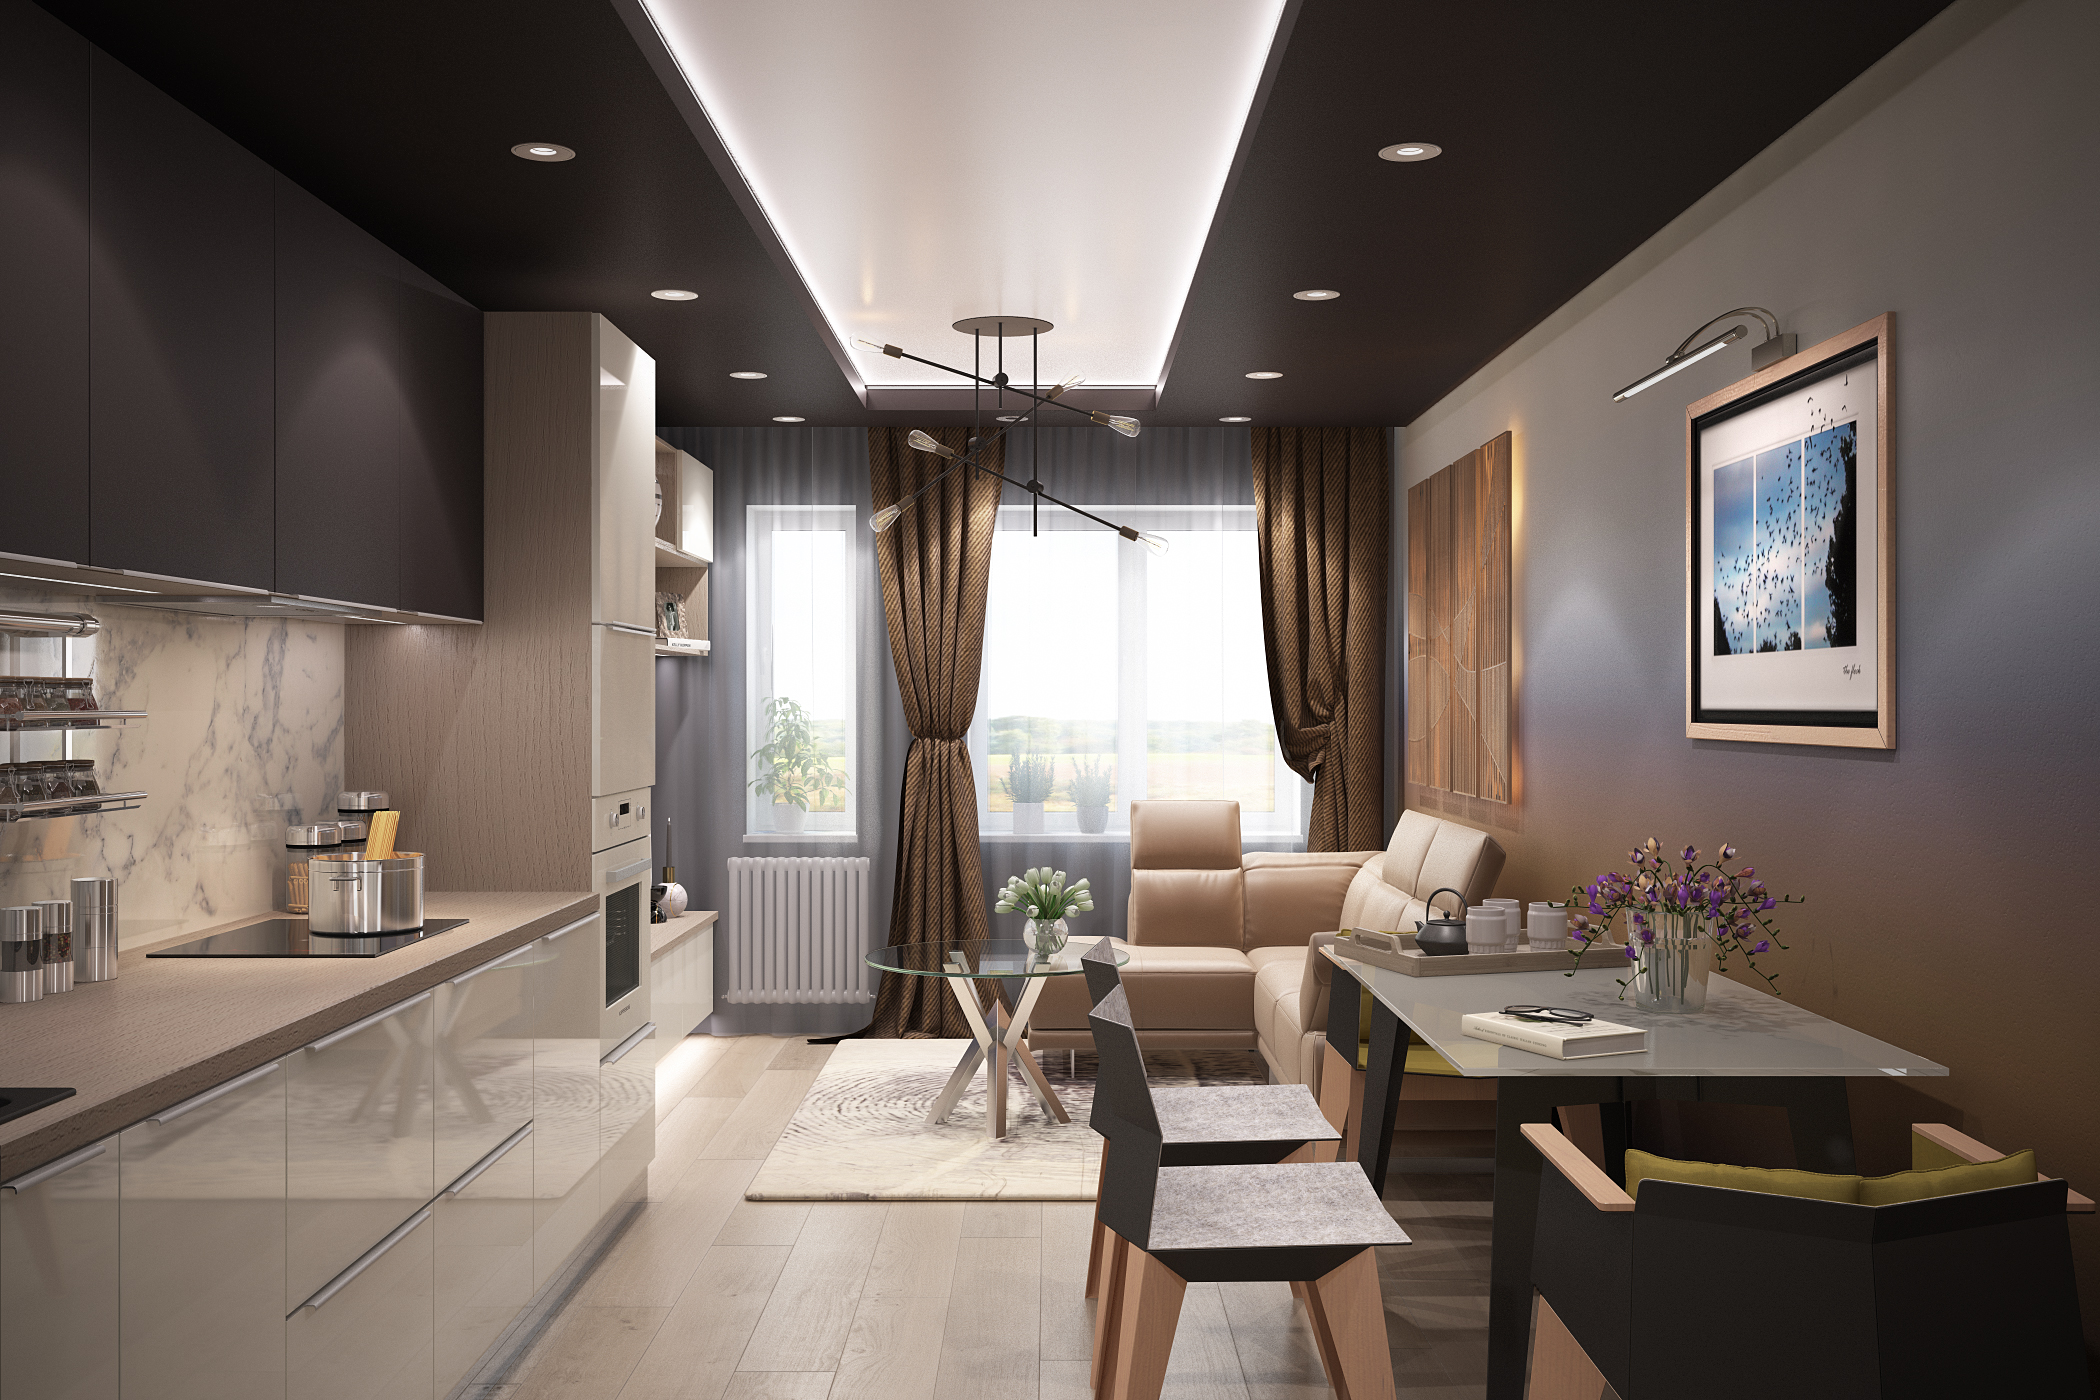 Kitchen and living room in 3d max vray 3.0 image